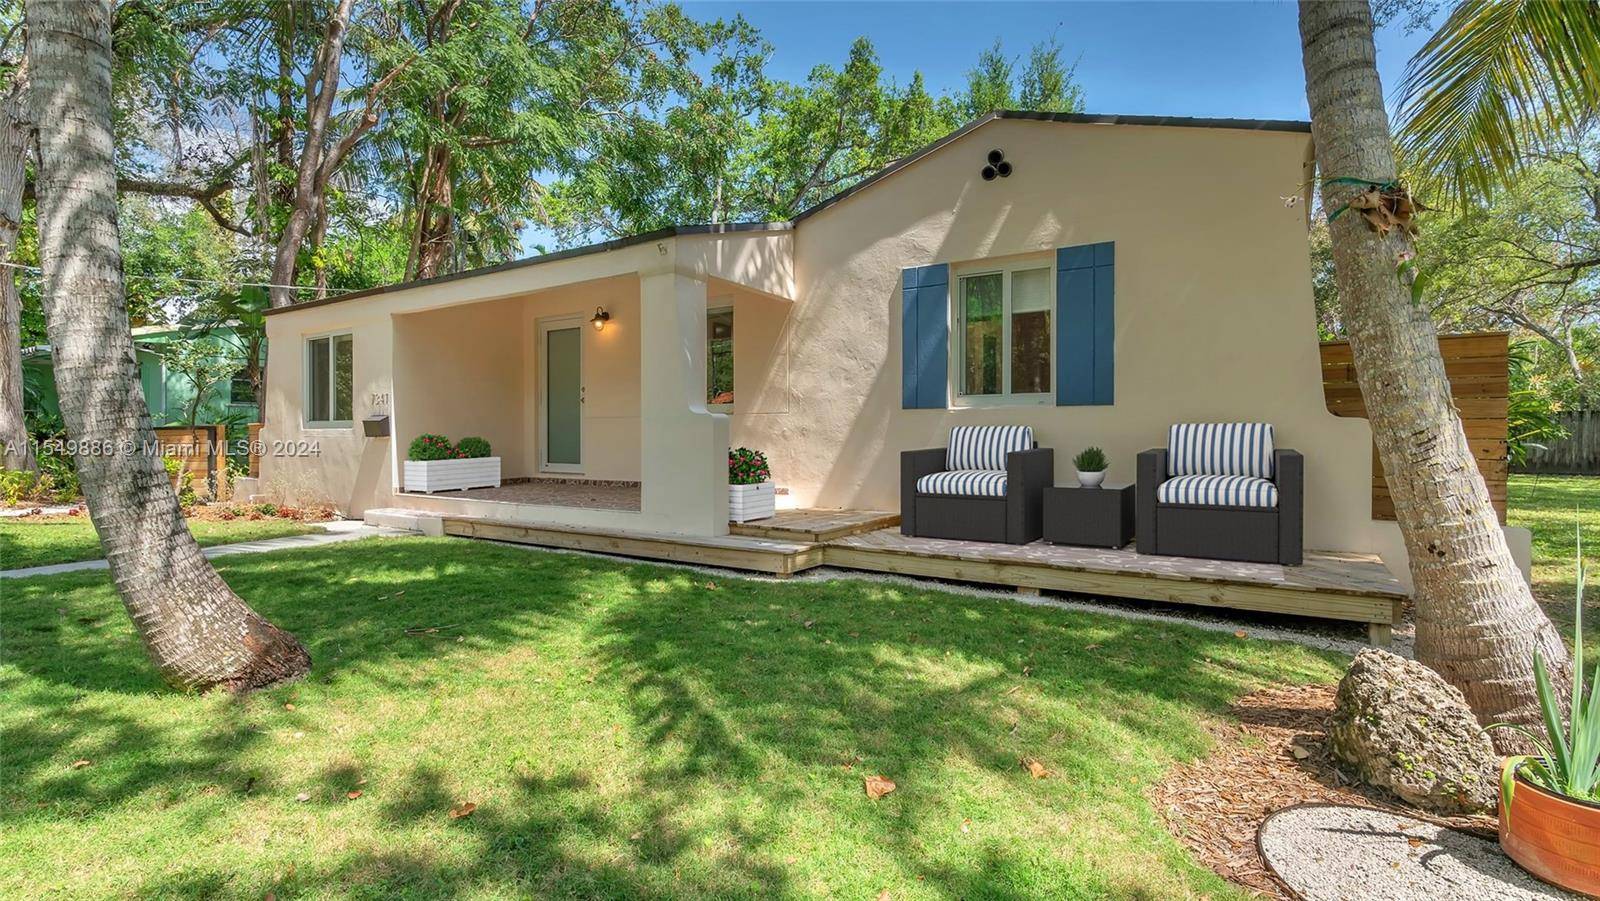 Welcome to your tranquil oasis in the heart of South Miami's Oak Heights neighborhood !